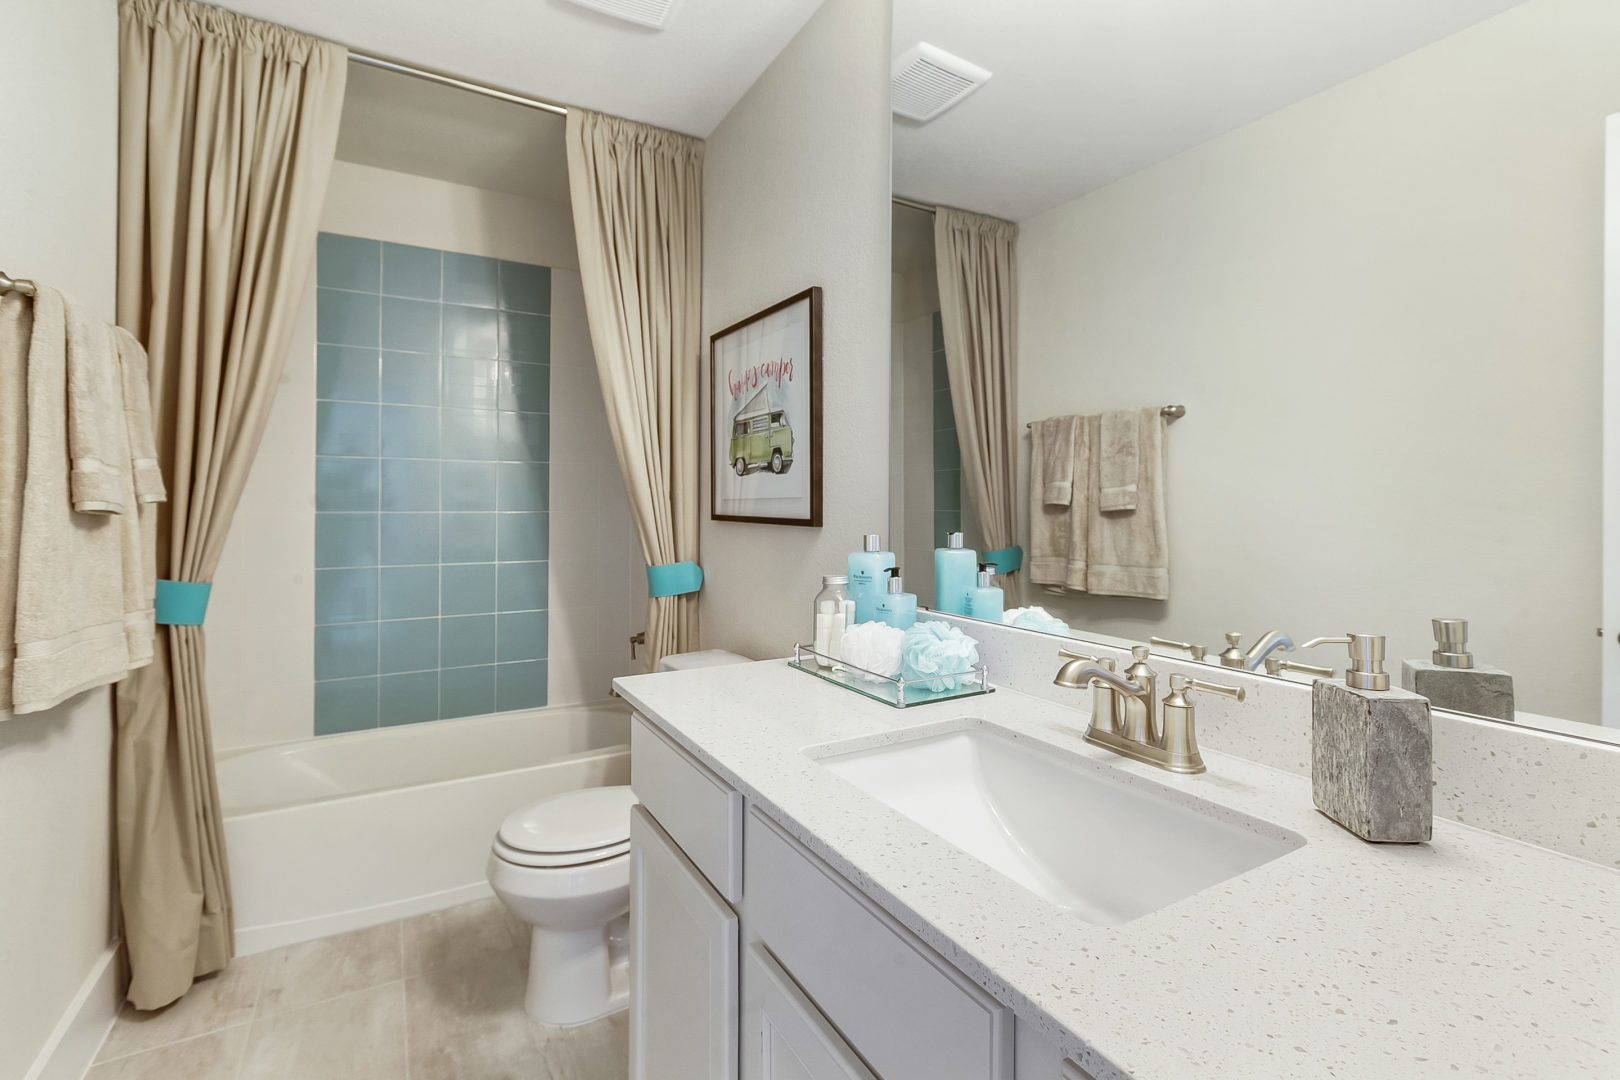 Village at Manor Commons - New Section Now Available! new homes in Manor, TX